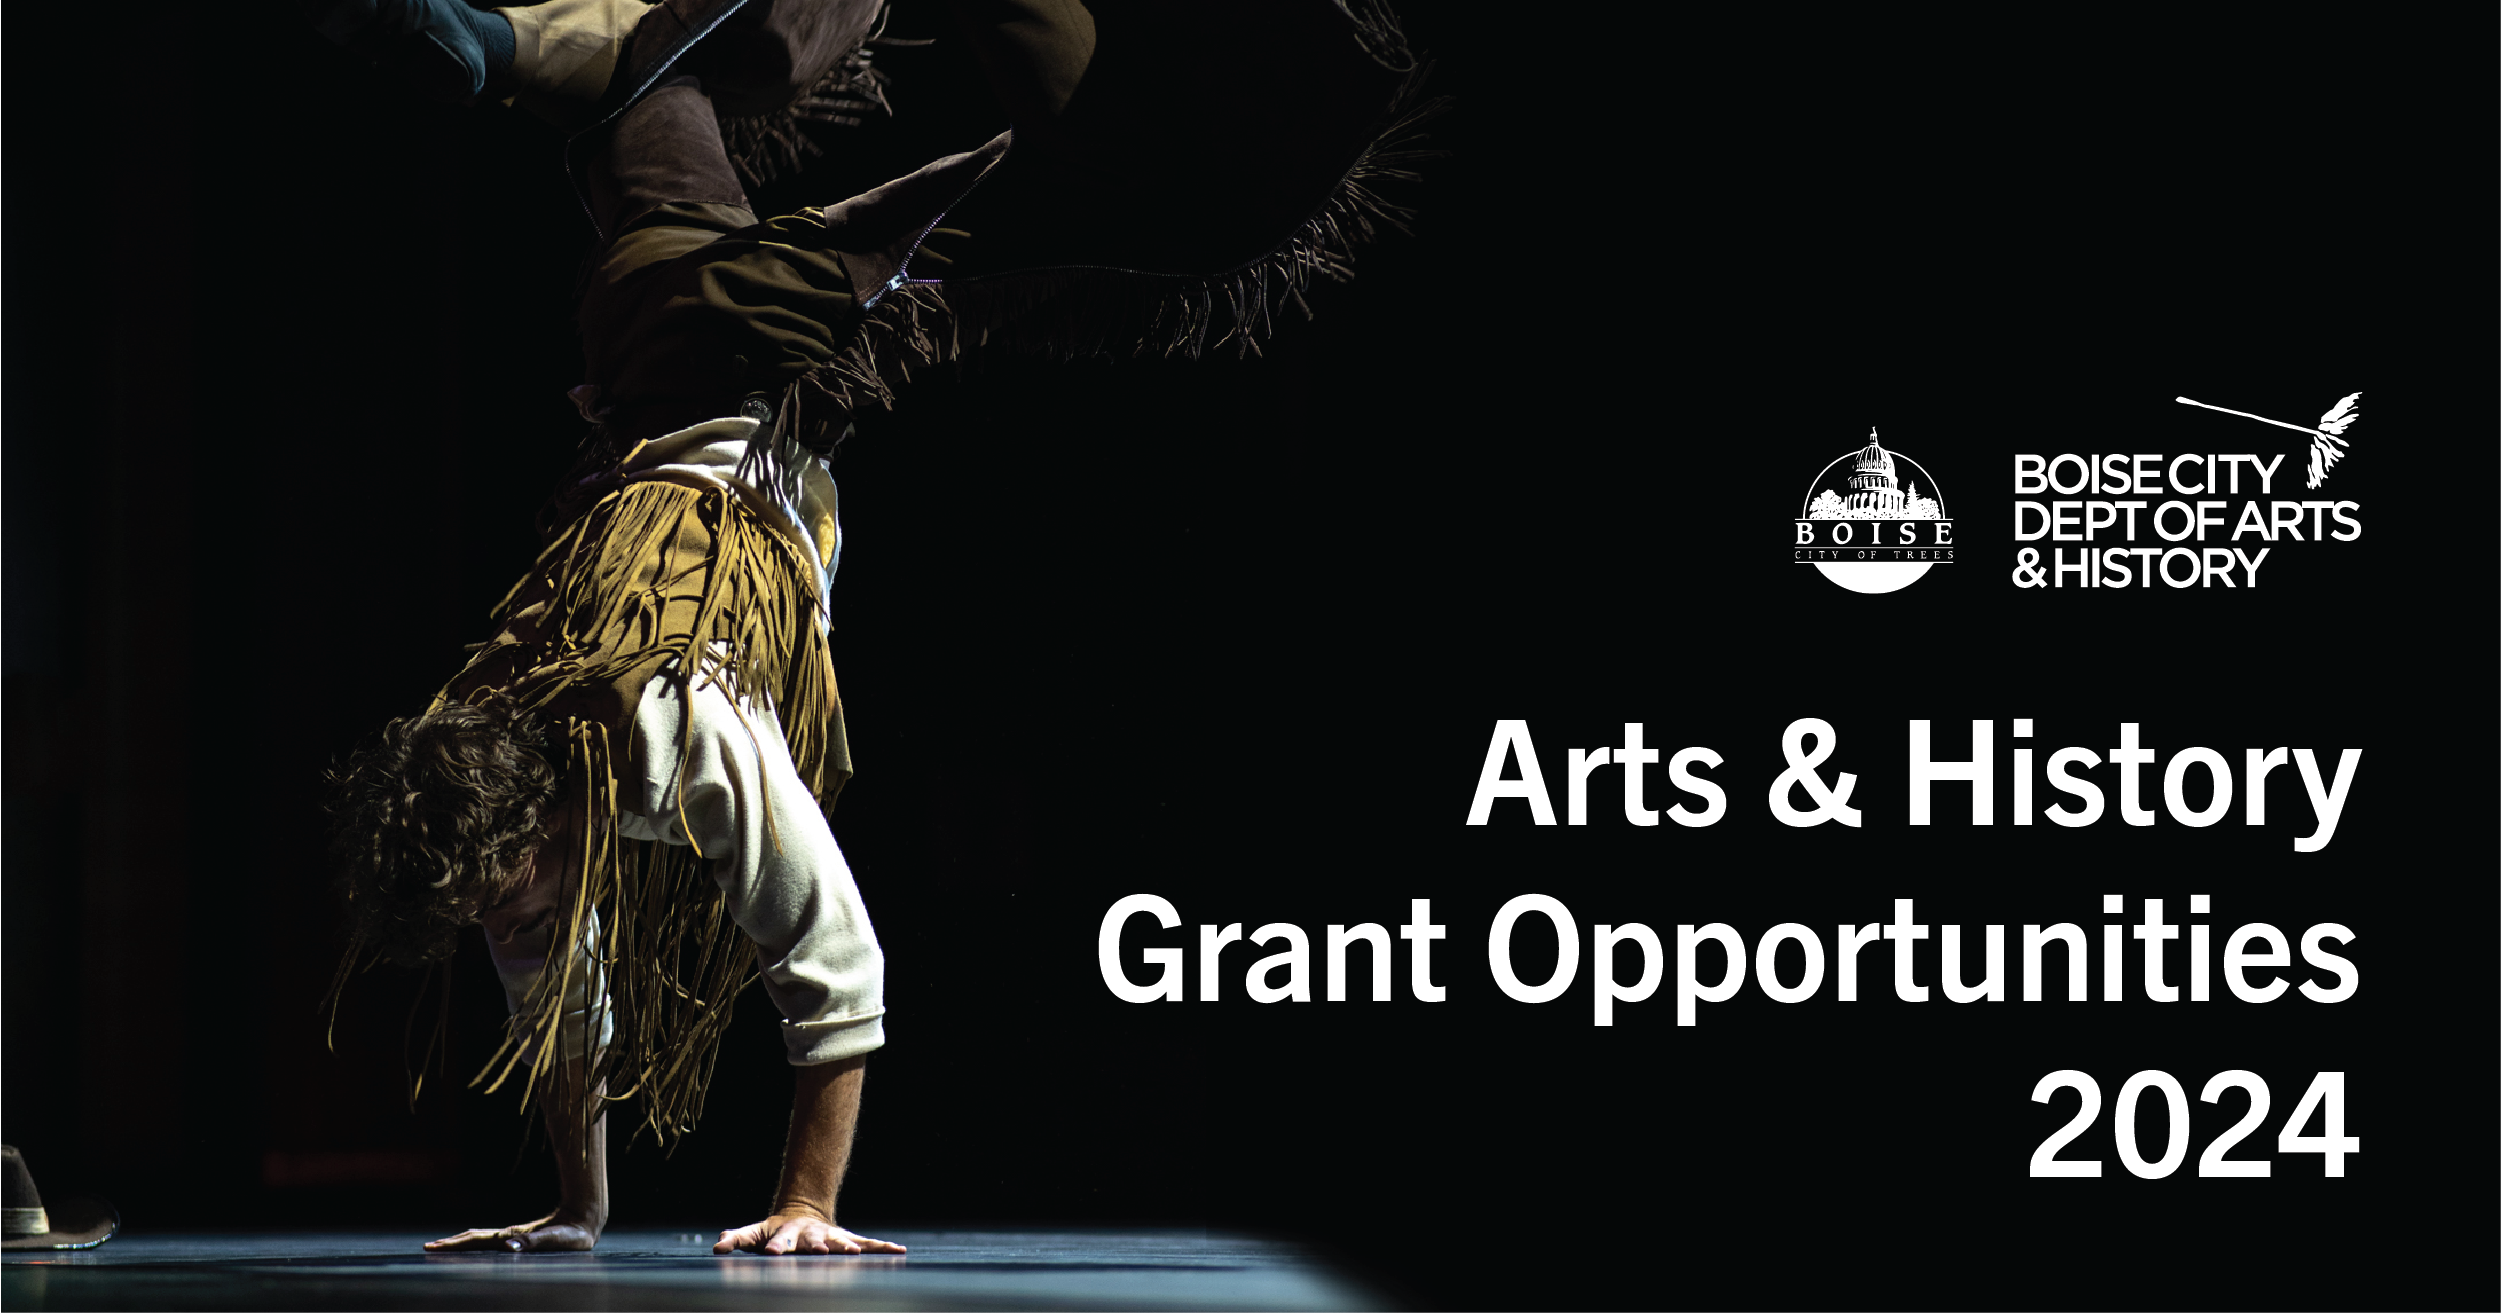 A male dancer wearing a western outfit is standing on his hands. His cowboy hat is laying on the stage in front of him. The City of Boise and the Boise City Dept. of Arts & History logos, along with Arts & History Grant Opportunities 2024 are written in white type on a black background.